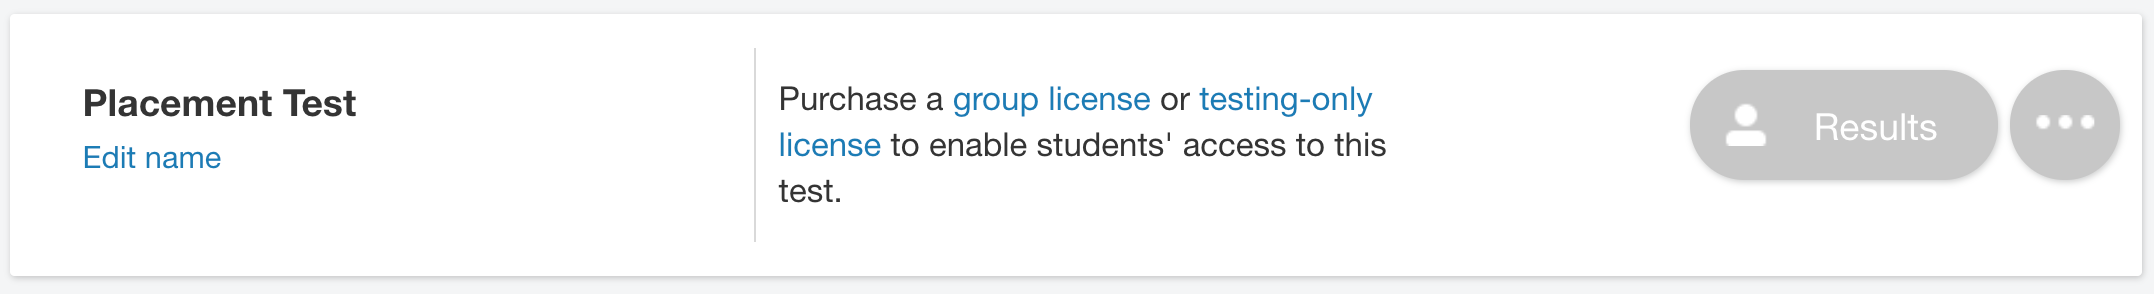 Tests list, showing "Purchase a group license or testing-only license to enable students' access to this test."